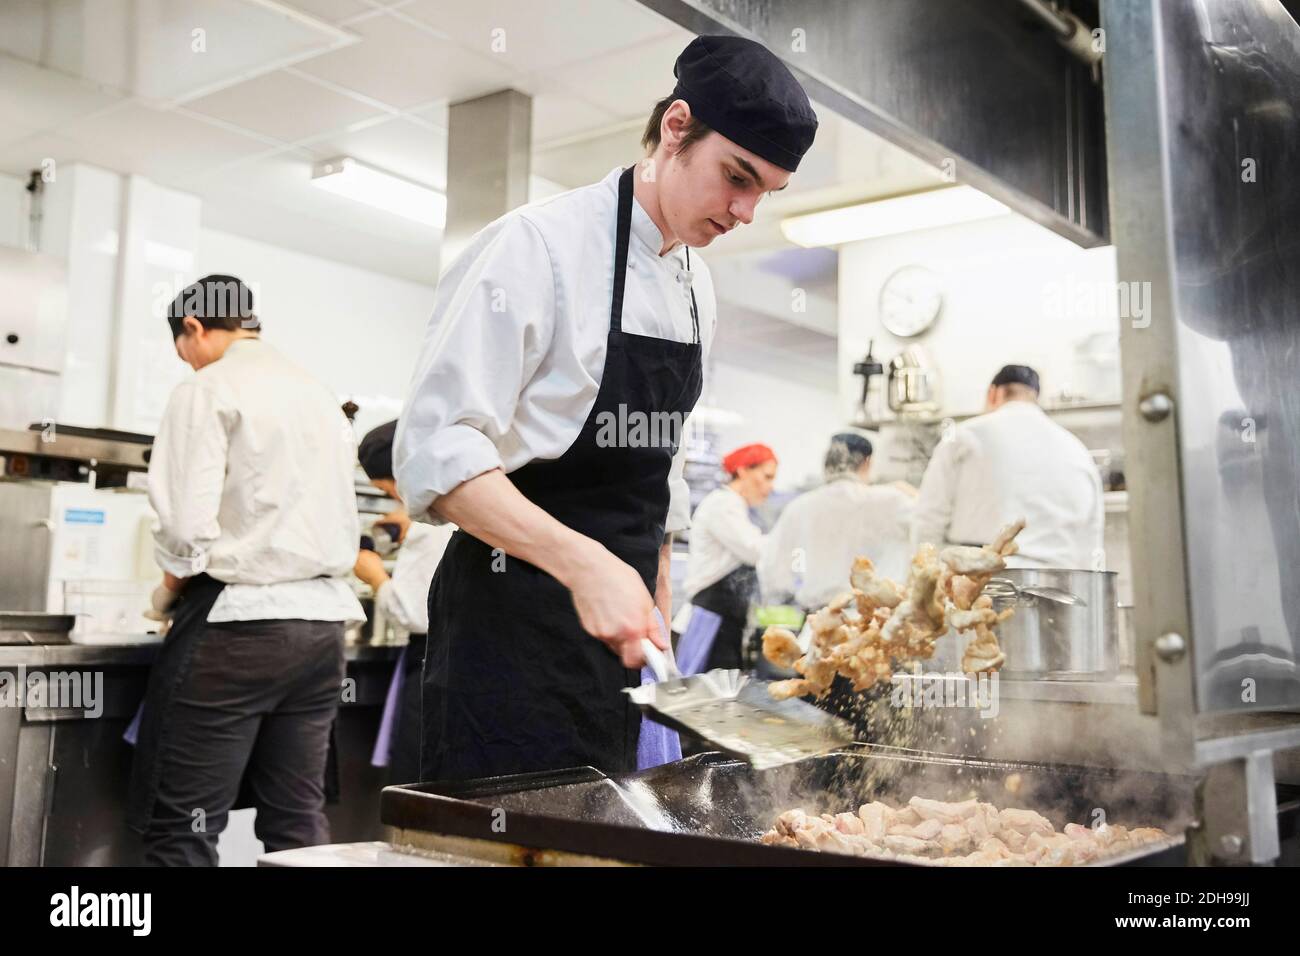 Male chef student tossing food with teacher and colleagues in background at cooking school Stock Photo